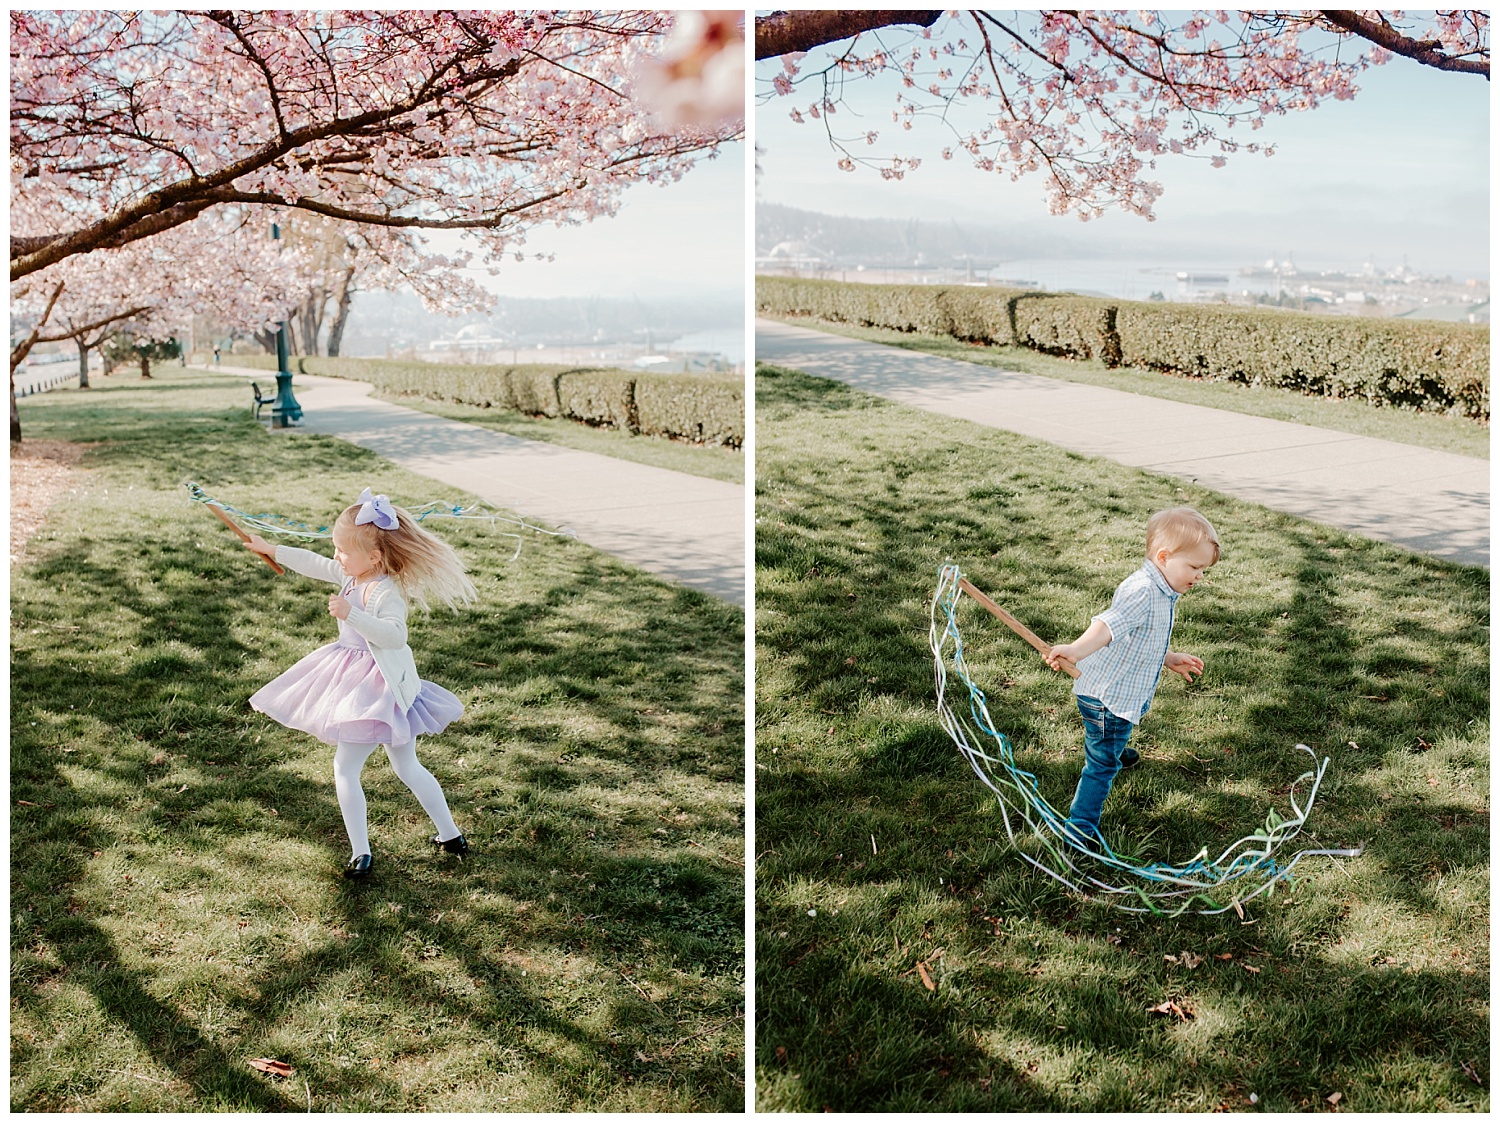 spring blossom family pictures at Grand Avenue, Everett Washington + Snohomish Family Photographer